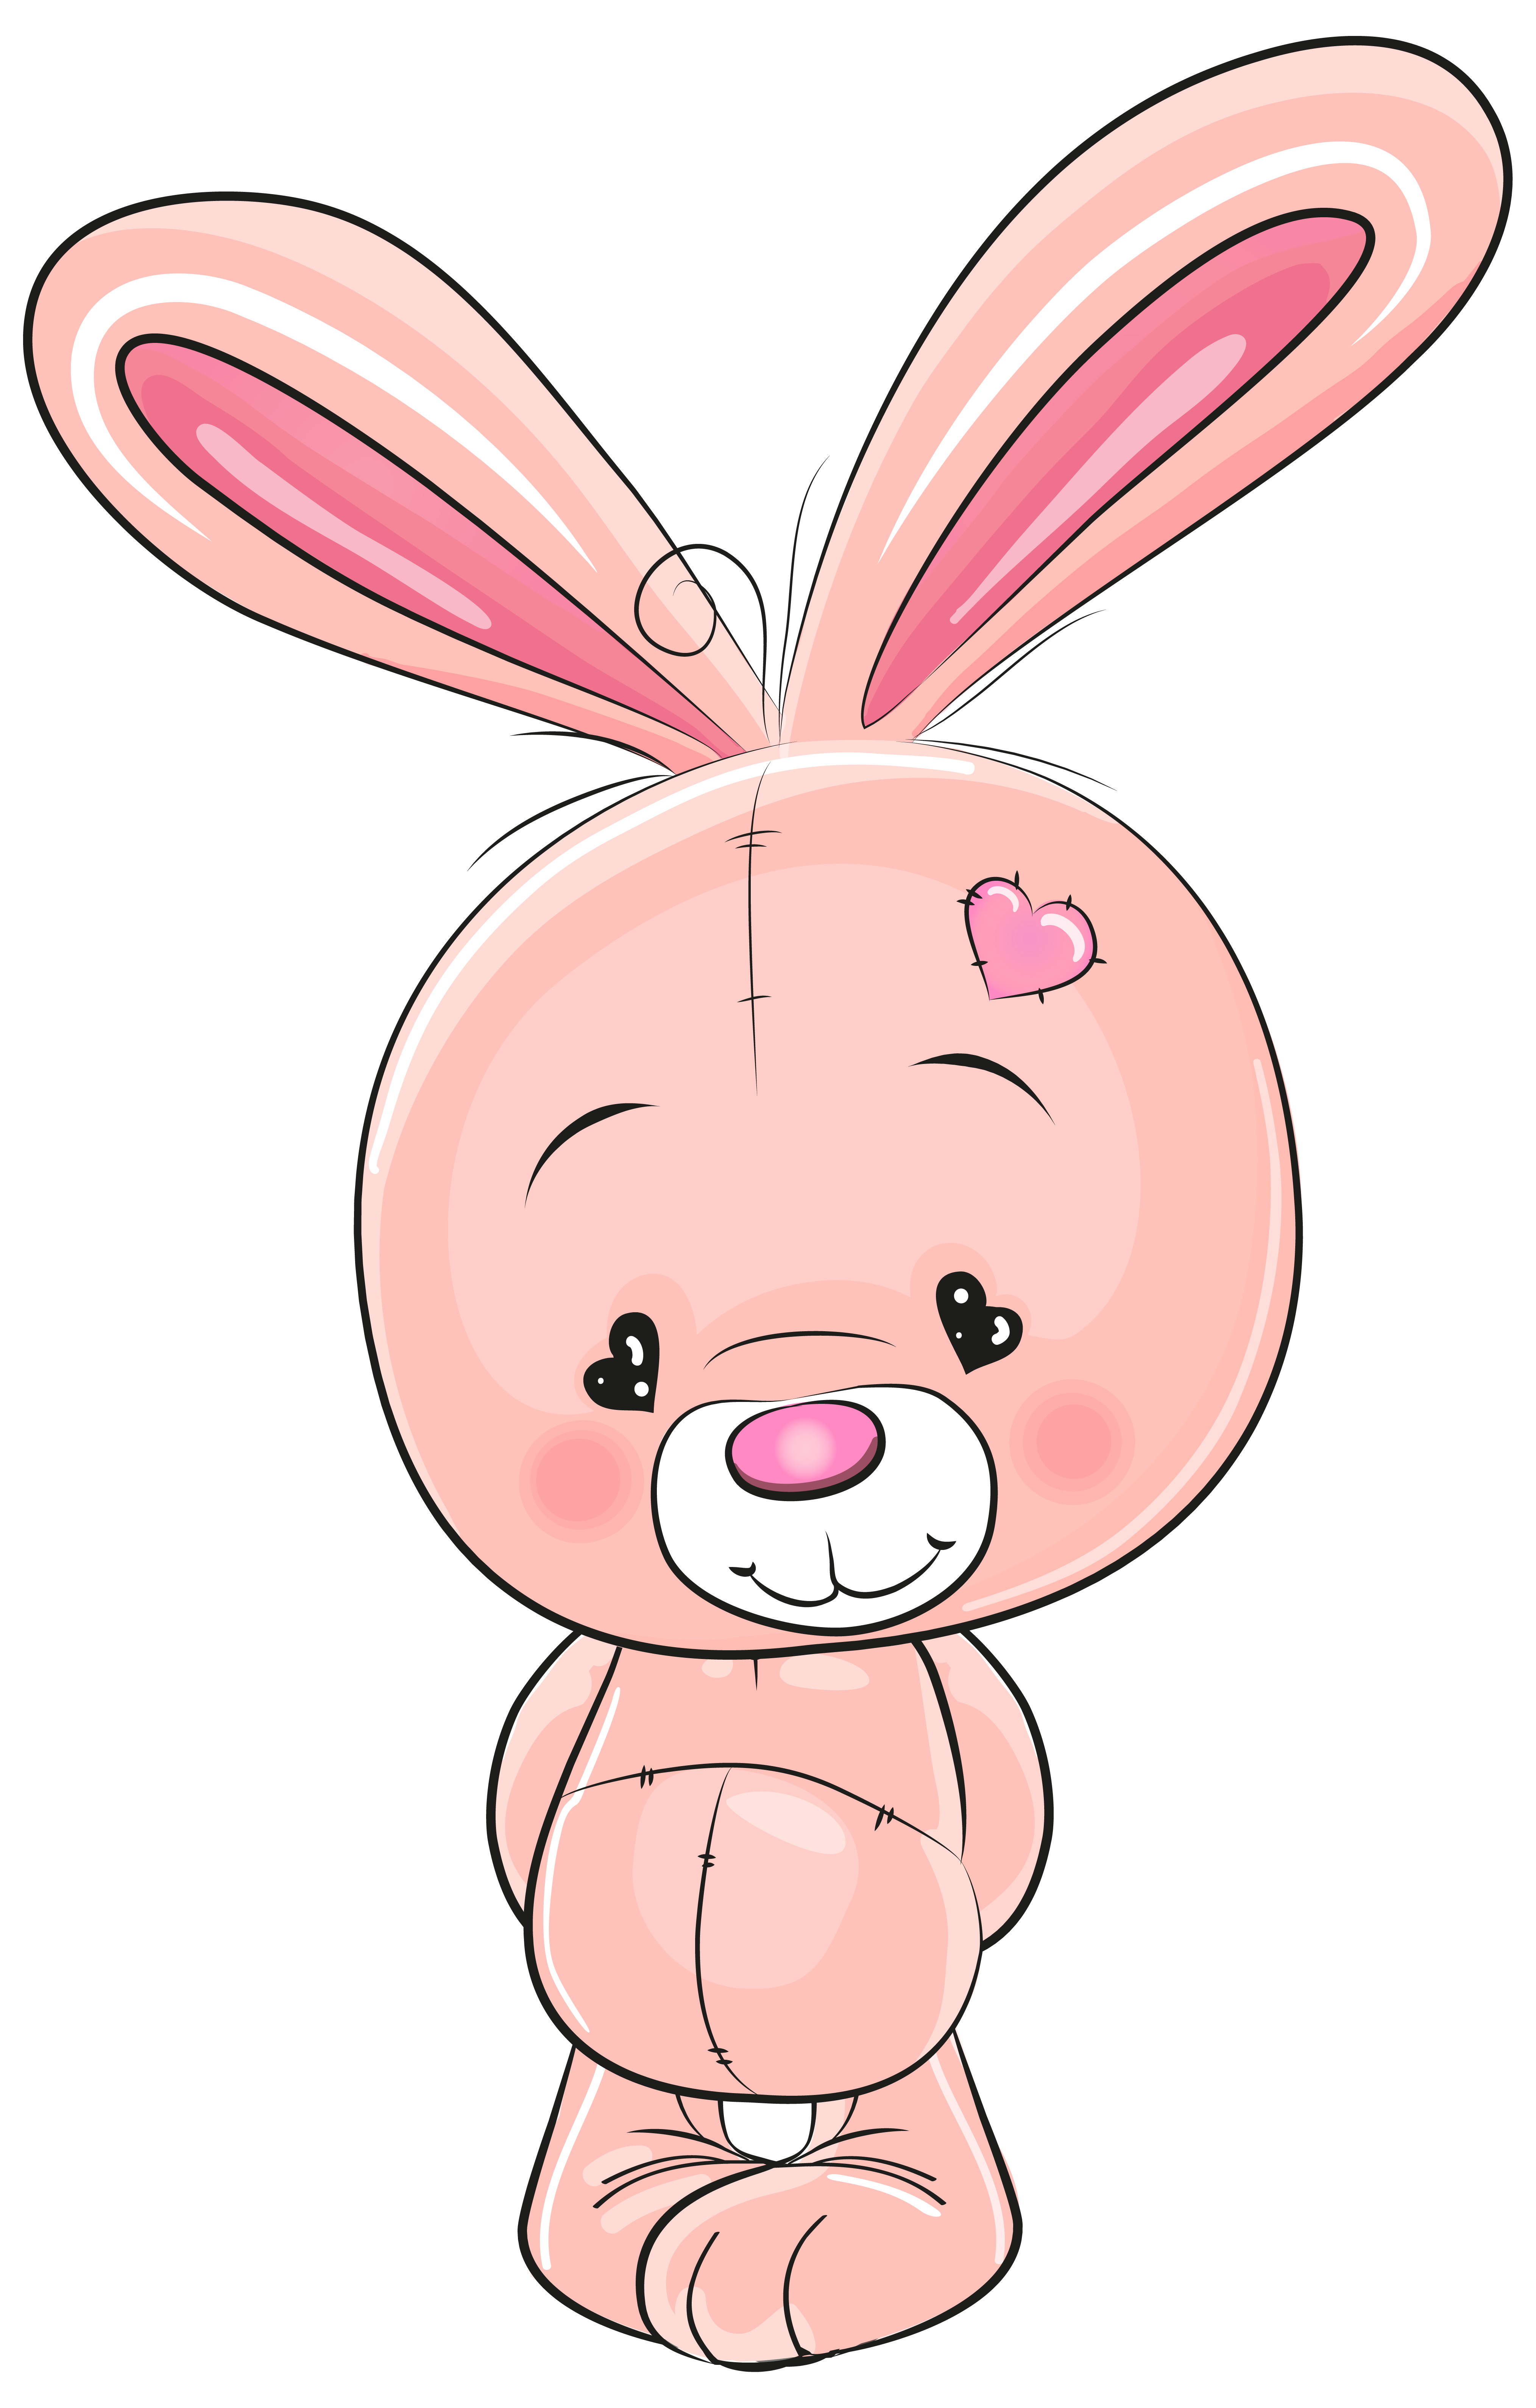 Cute Pink Bunny PNG Clip Art Image | Gallery Yopriceville - High